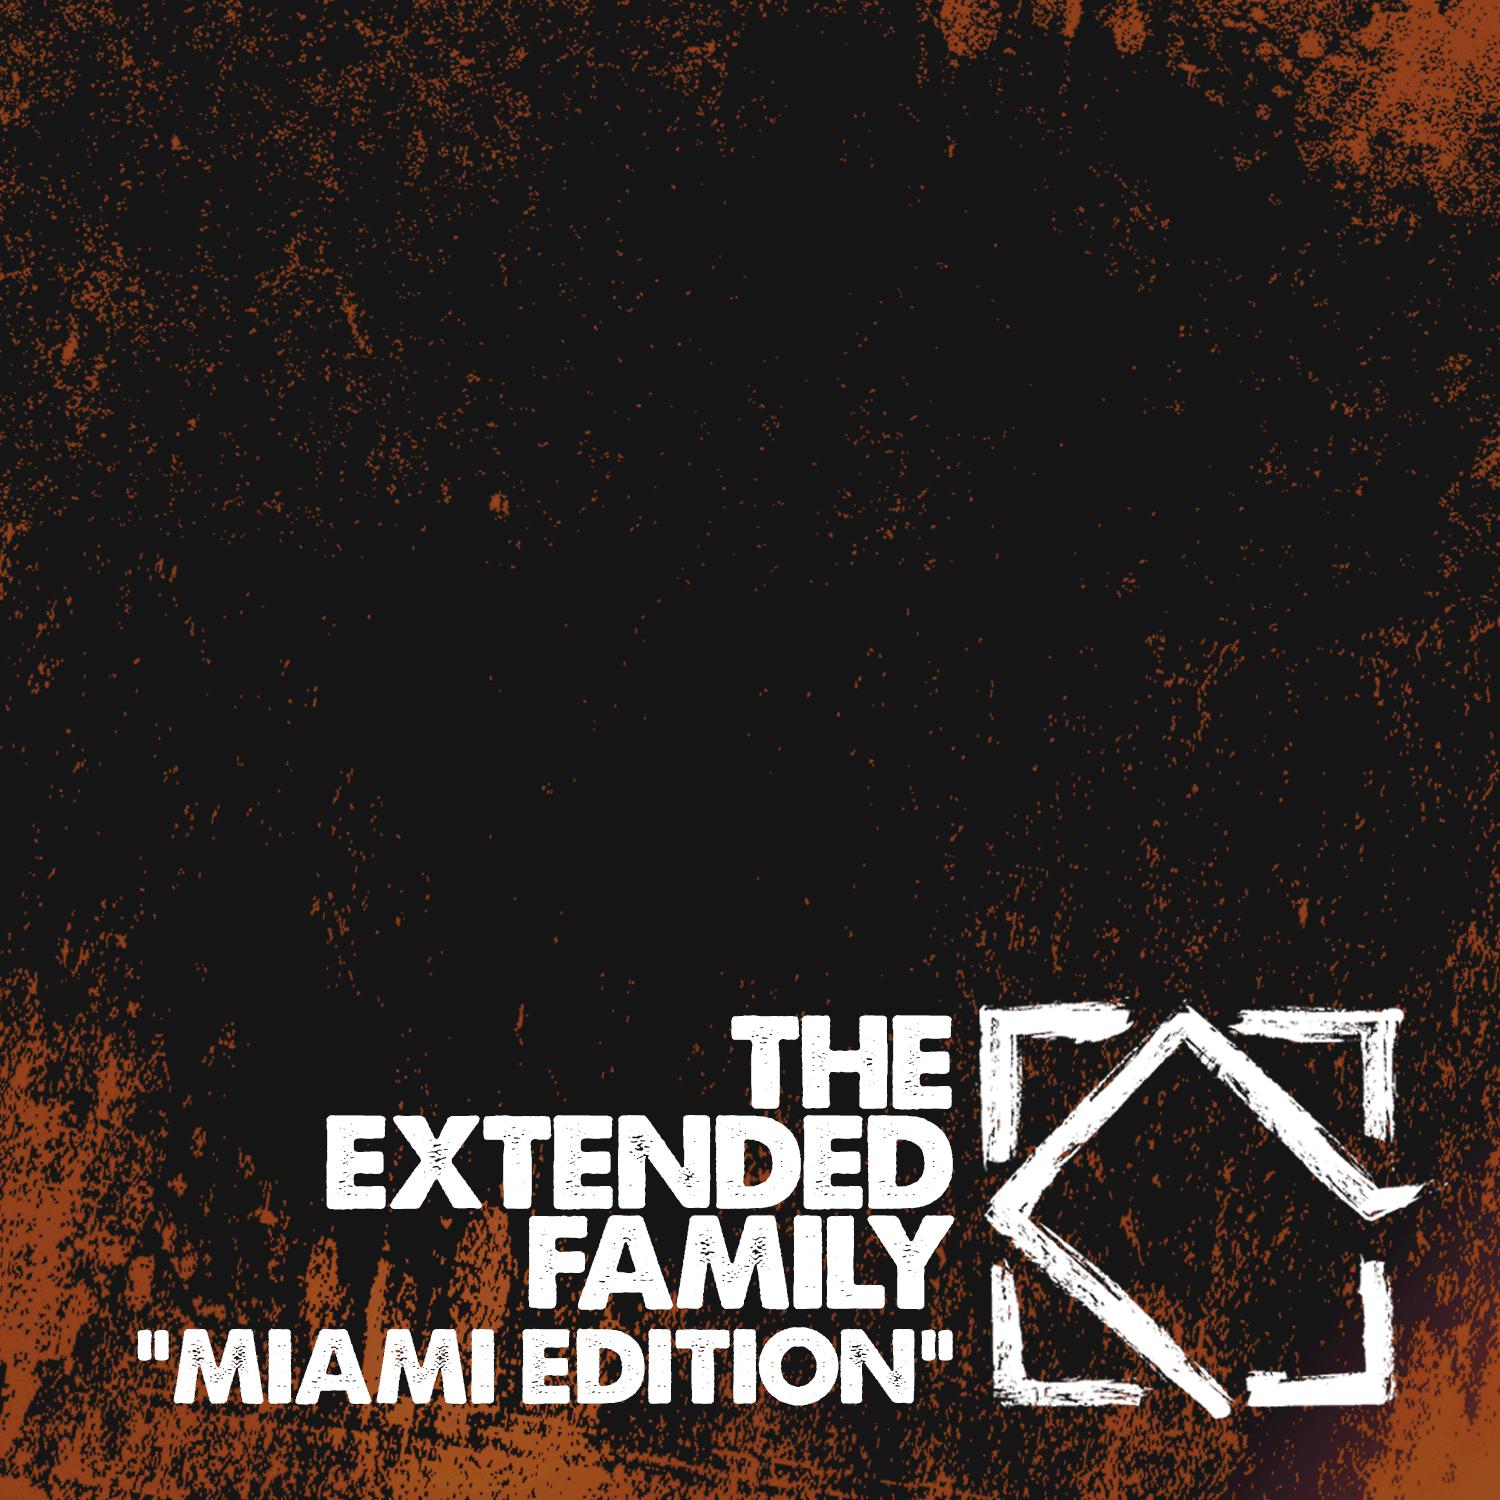 The Extended Family - Miami Edition